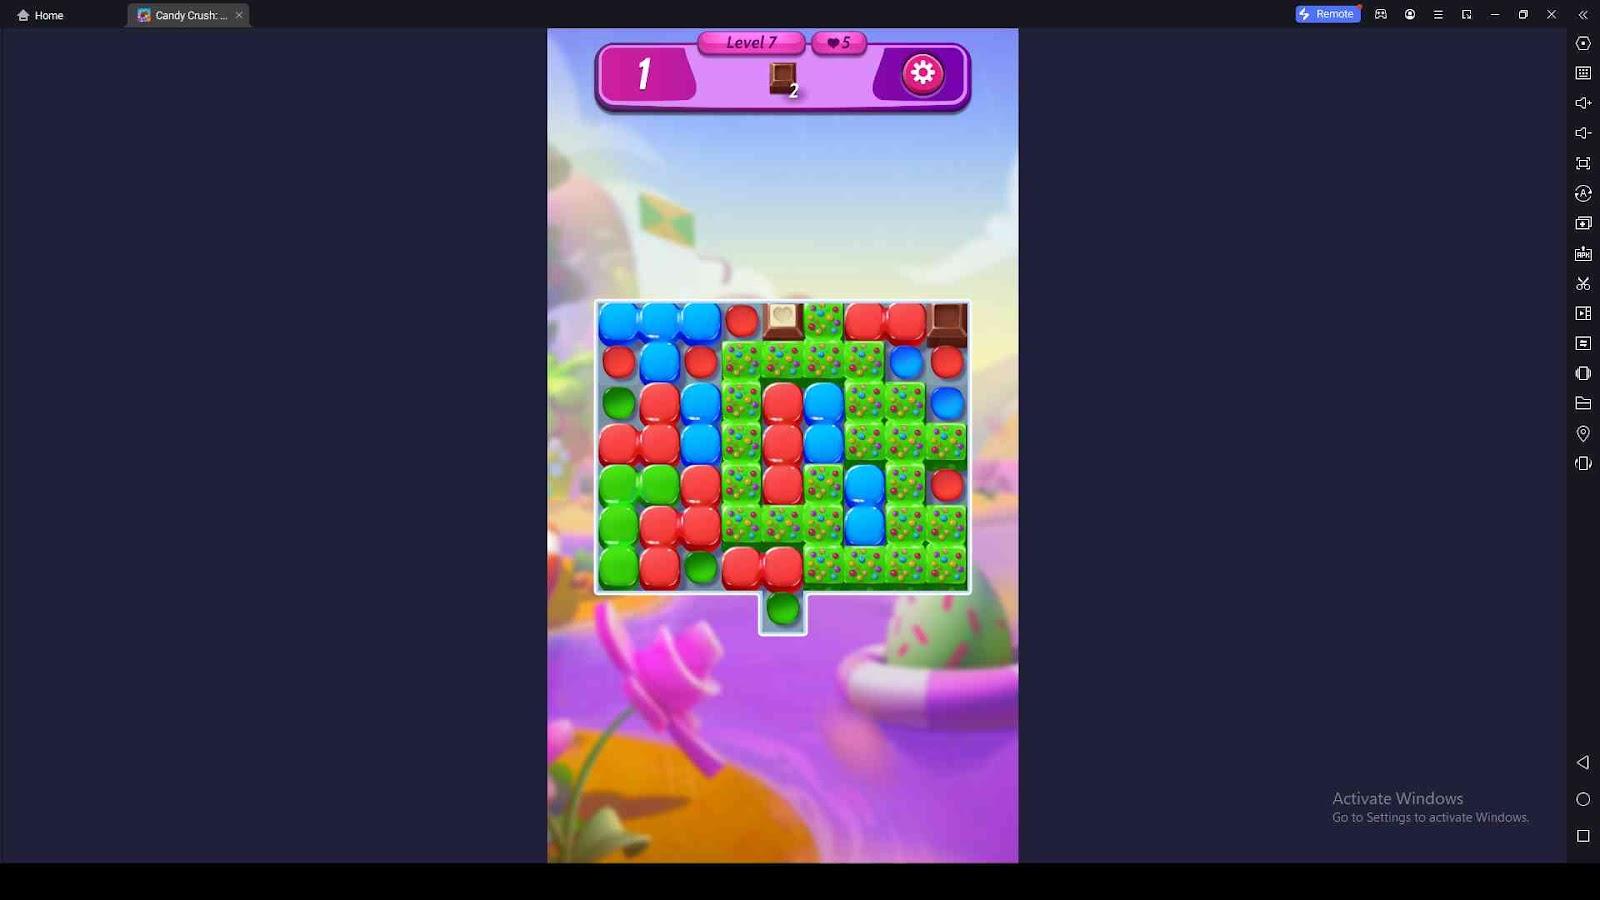 Play Candy Crush: Blast! with Limited Moves